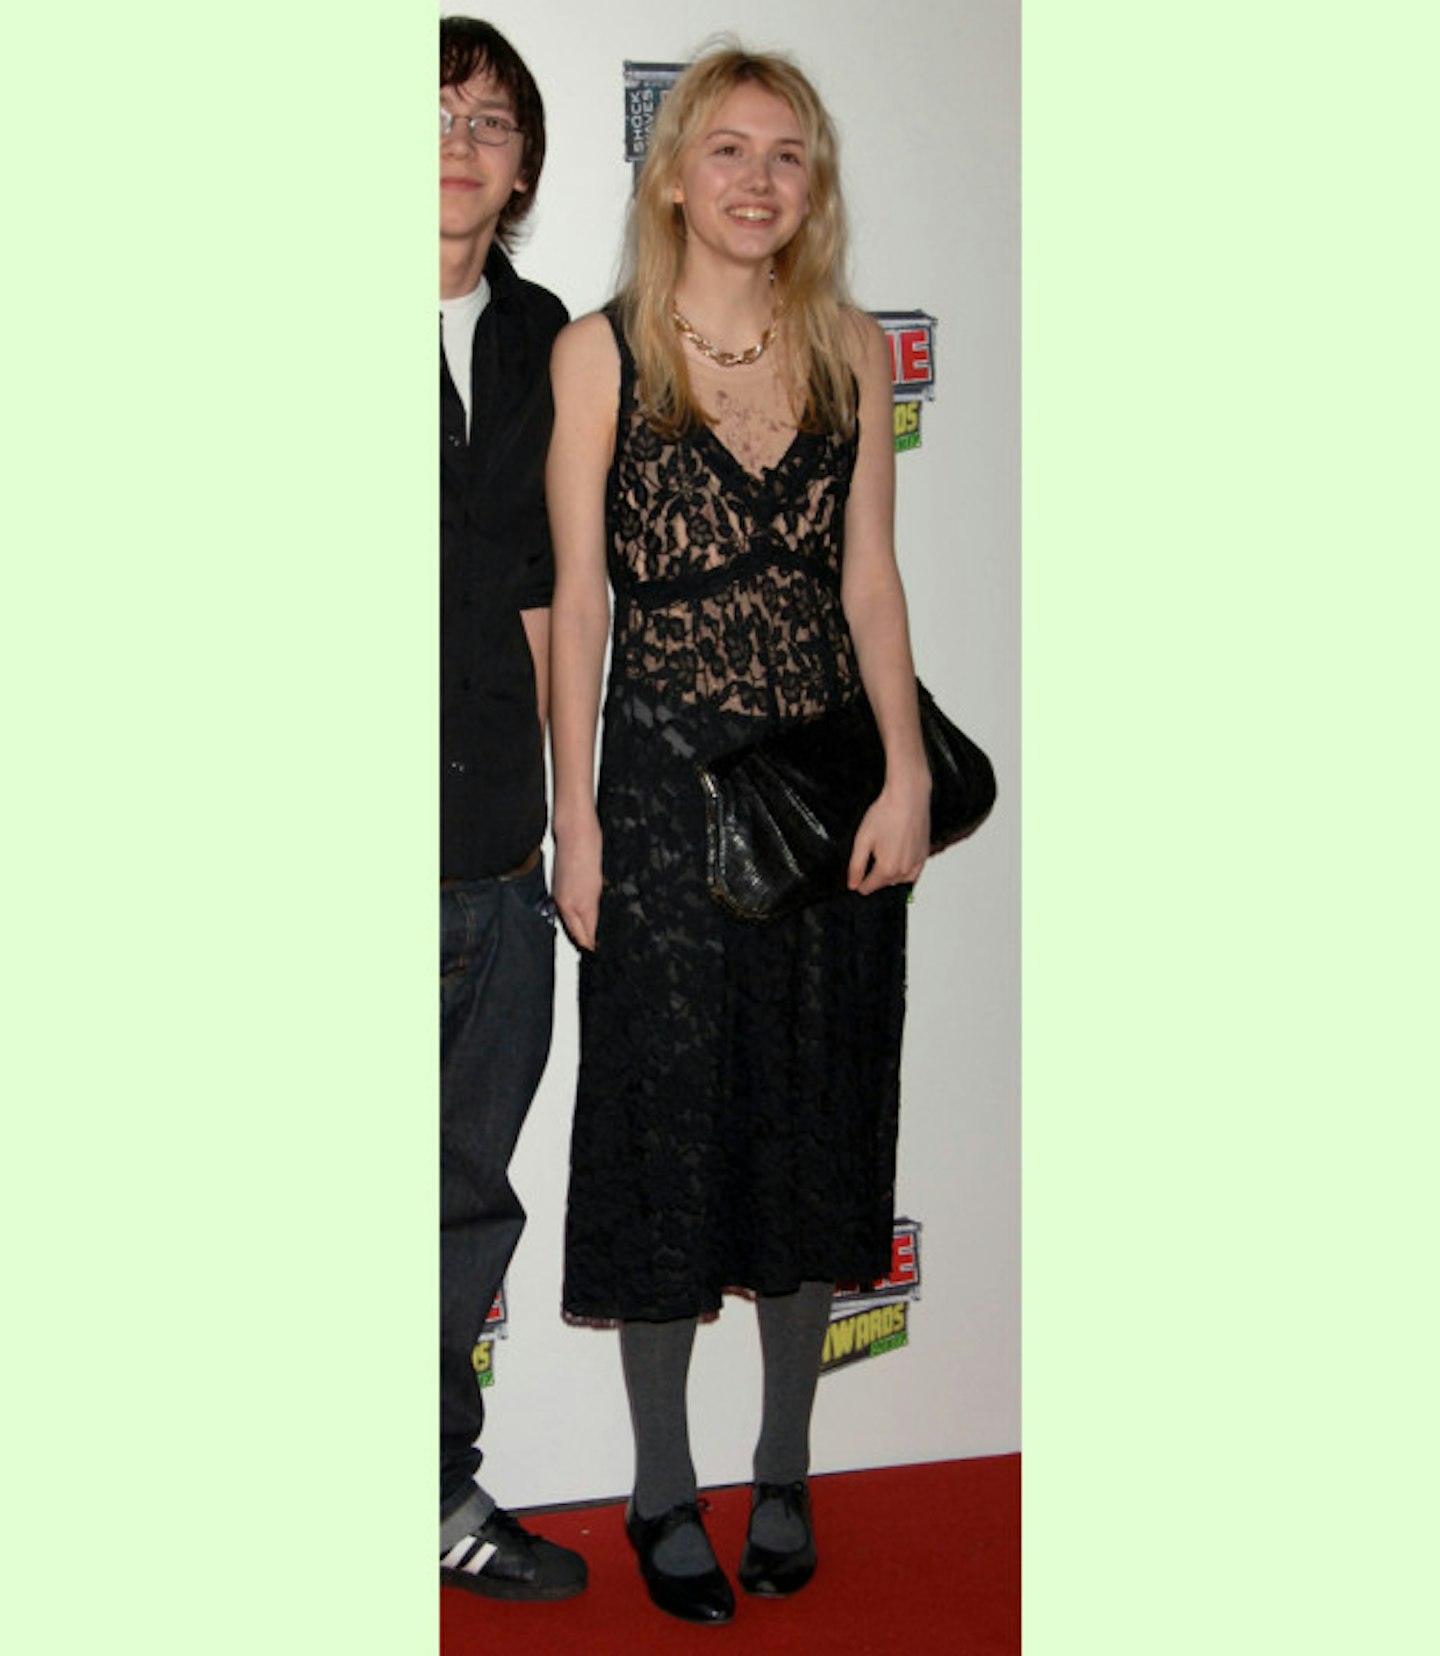 game-of-thrones-before-stylist-hannah-murray-black-lace-dress